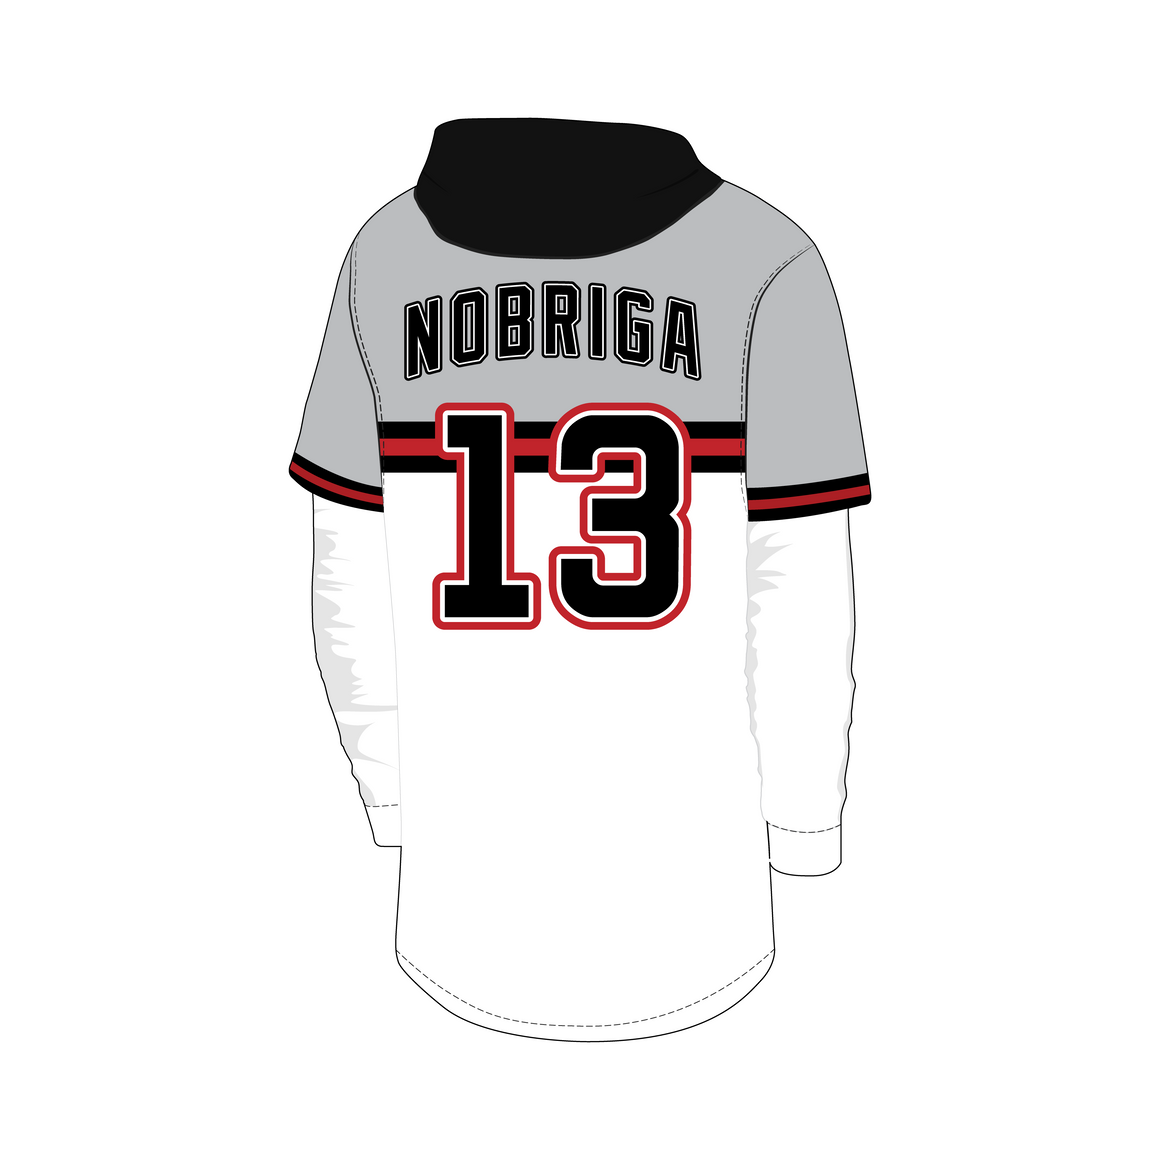 Sublimated Cozy Jersey - White/Grey